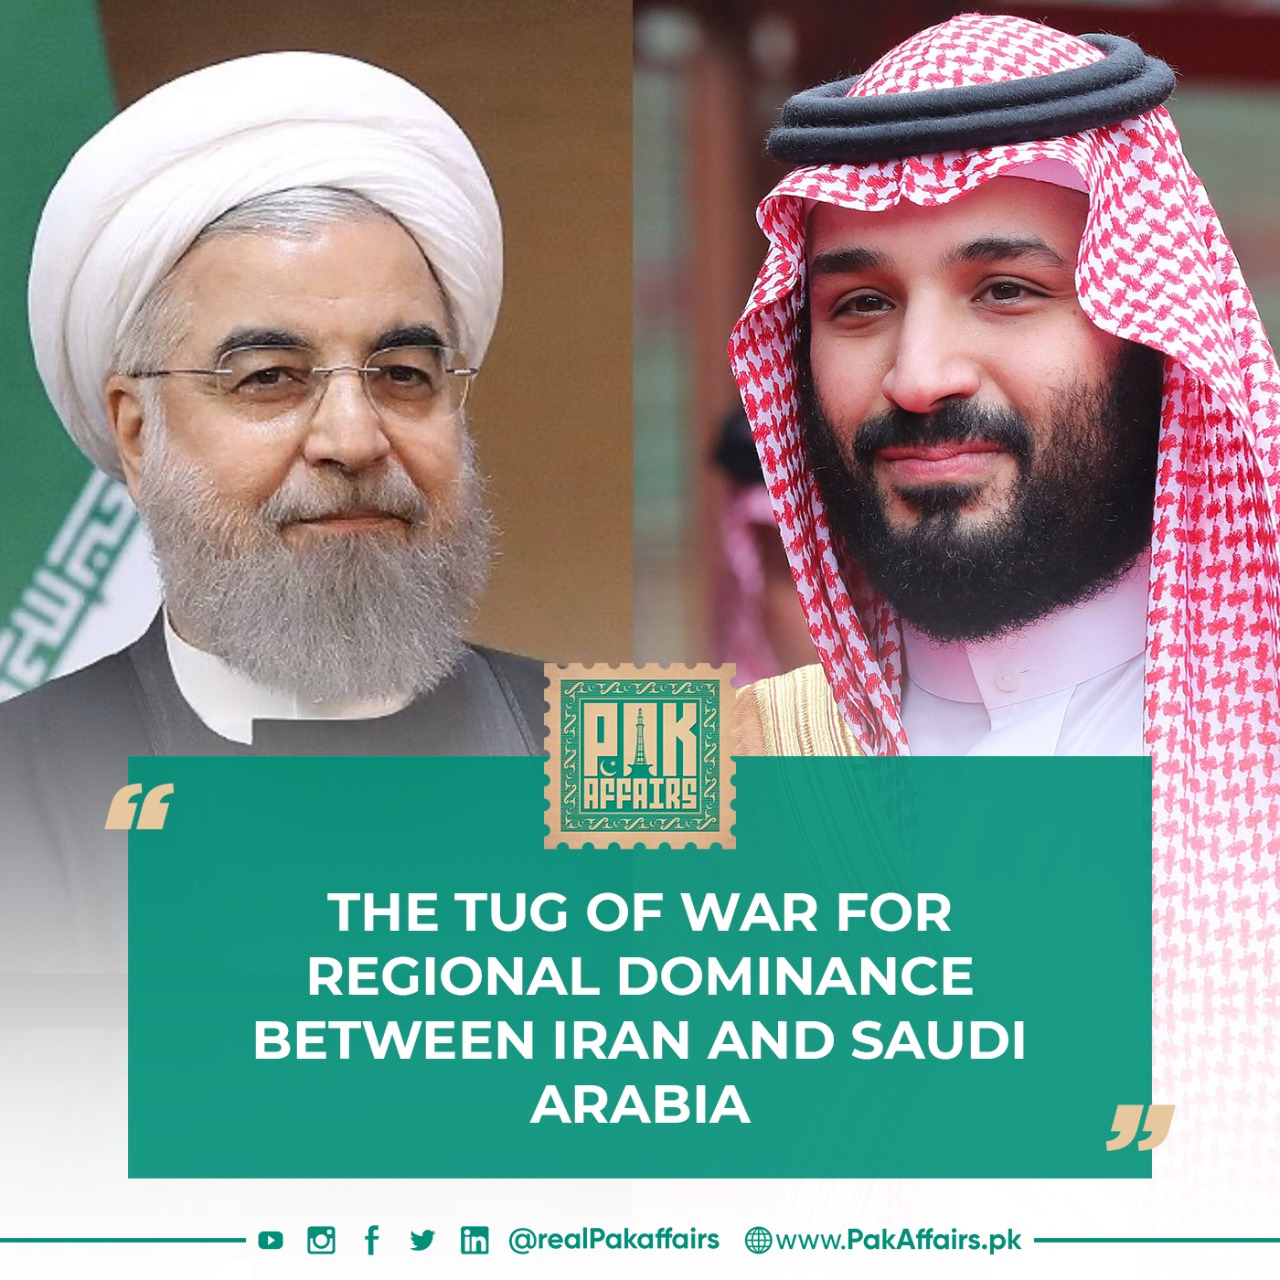 The Tug of War for Regional Dominance: Why Do Iran and Saudi Arabia Hate Each Other?